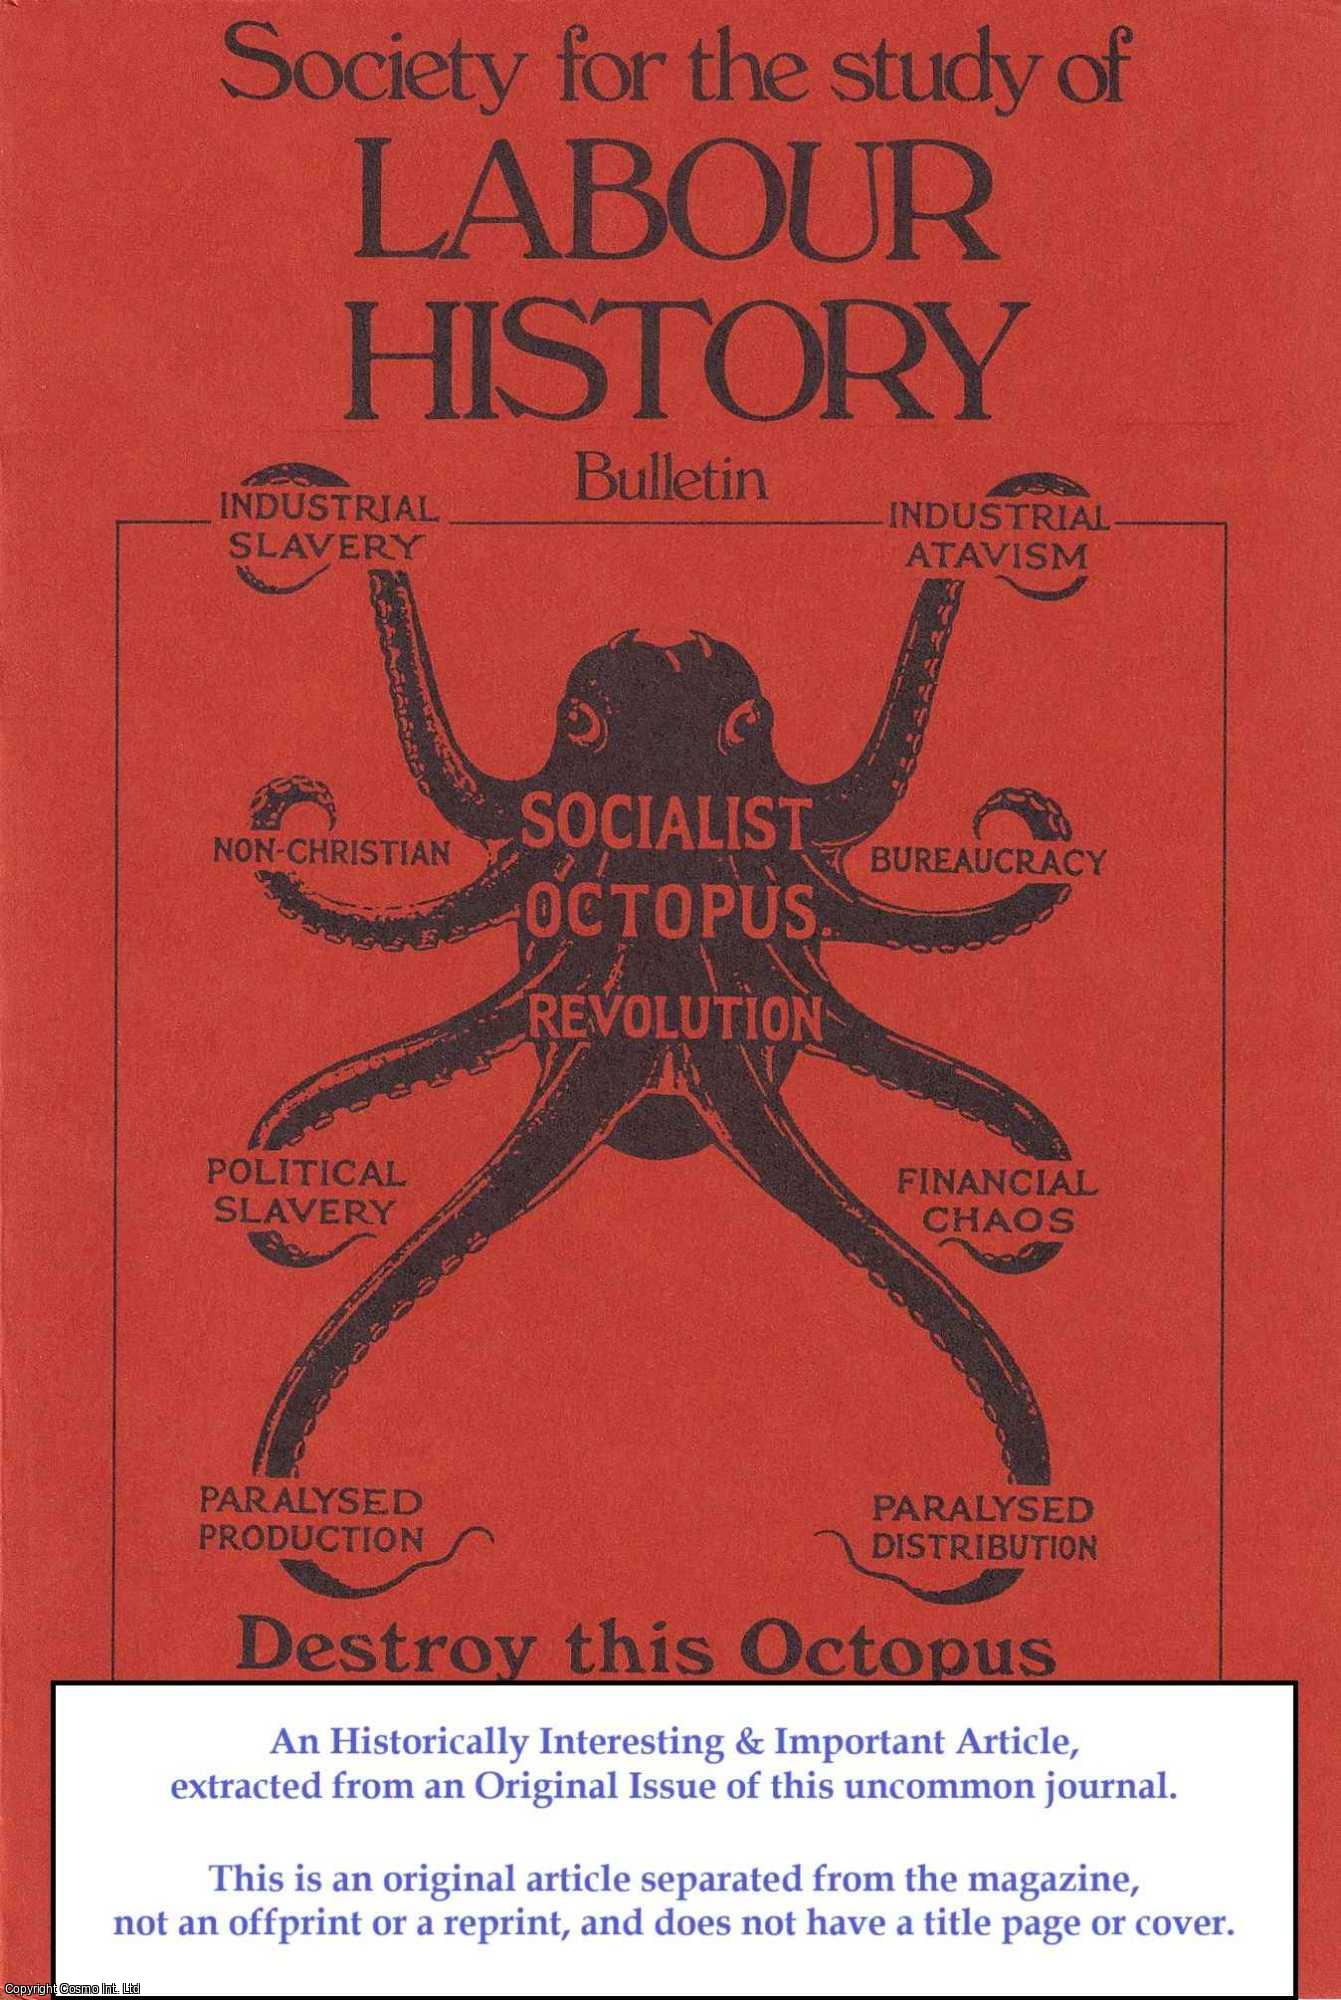 Harvey Levenstein - What ever happened to Labour and the Mexican Revolutionaries? An original article from Bulletin of the Society for the Study of Labour History, 1977.